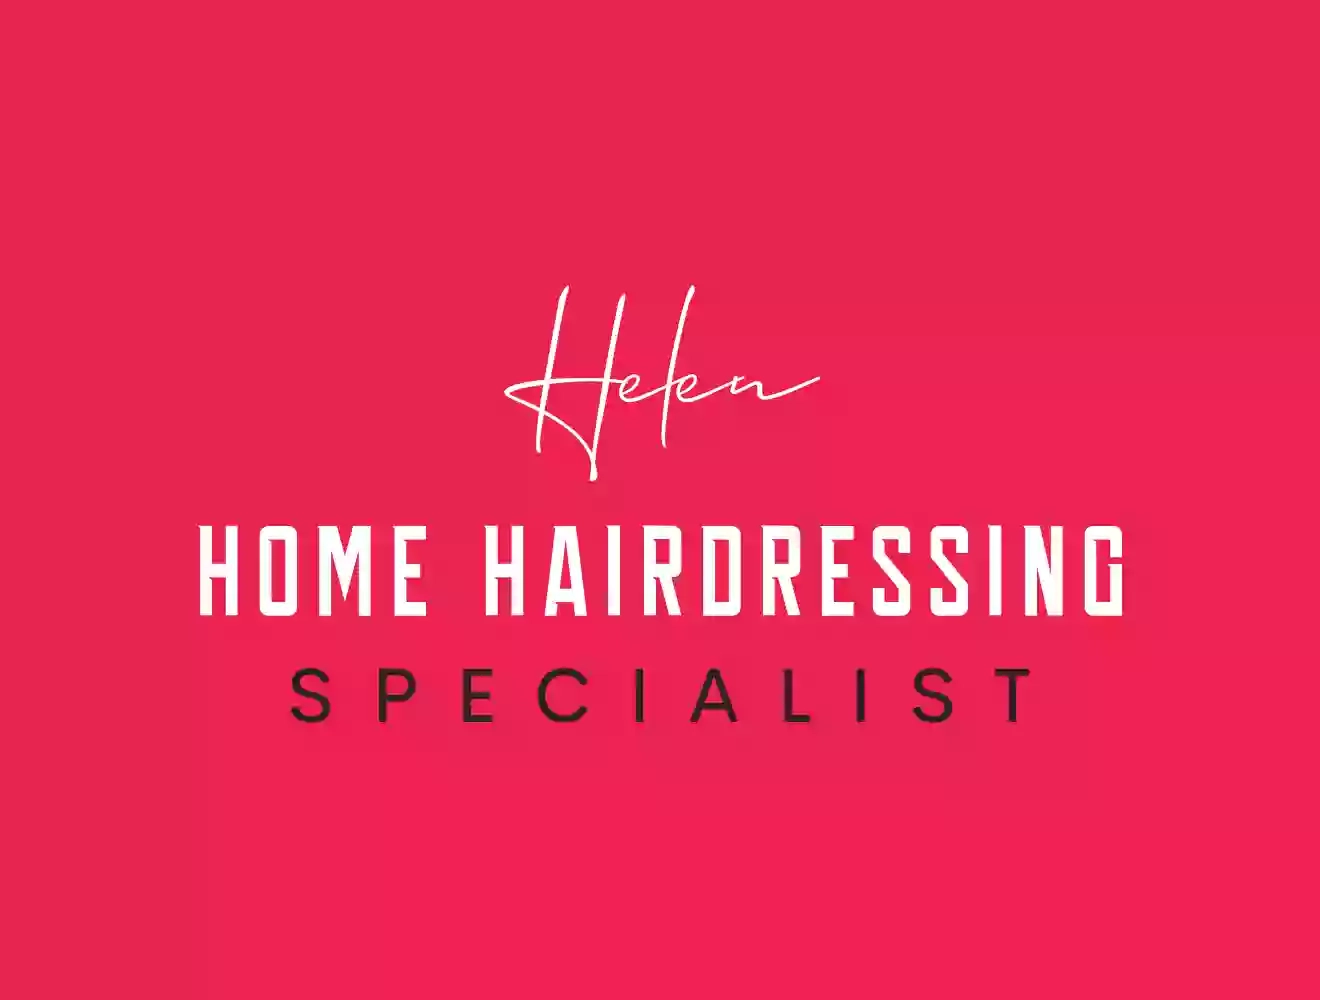 Home Hairdressing Specialist